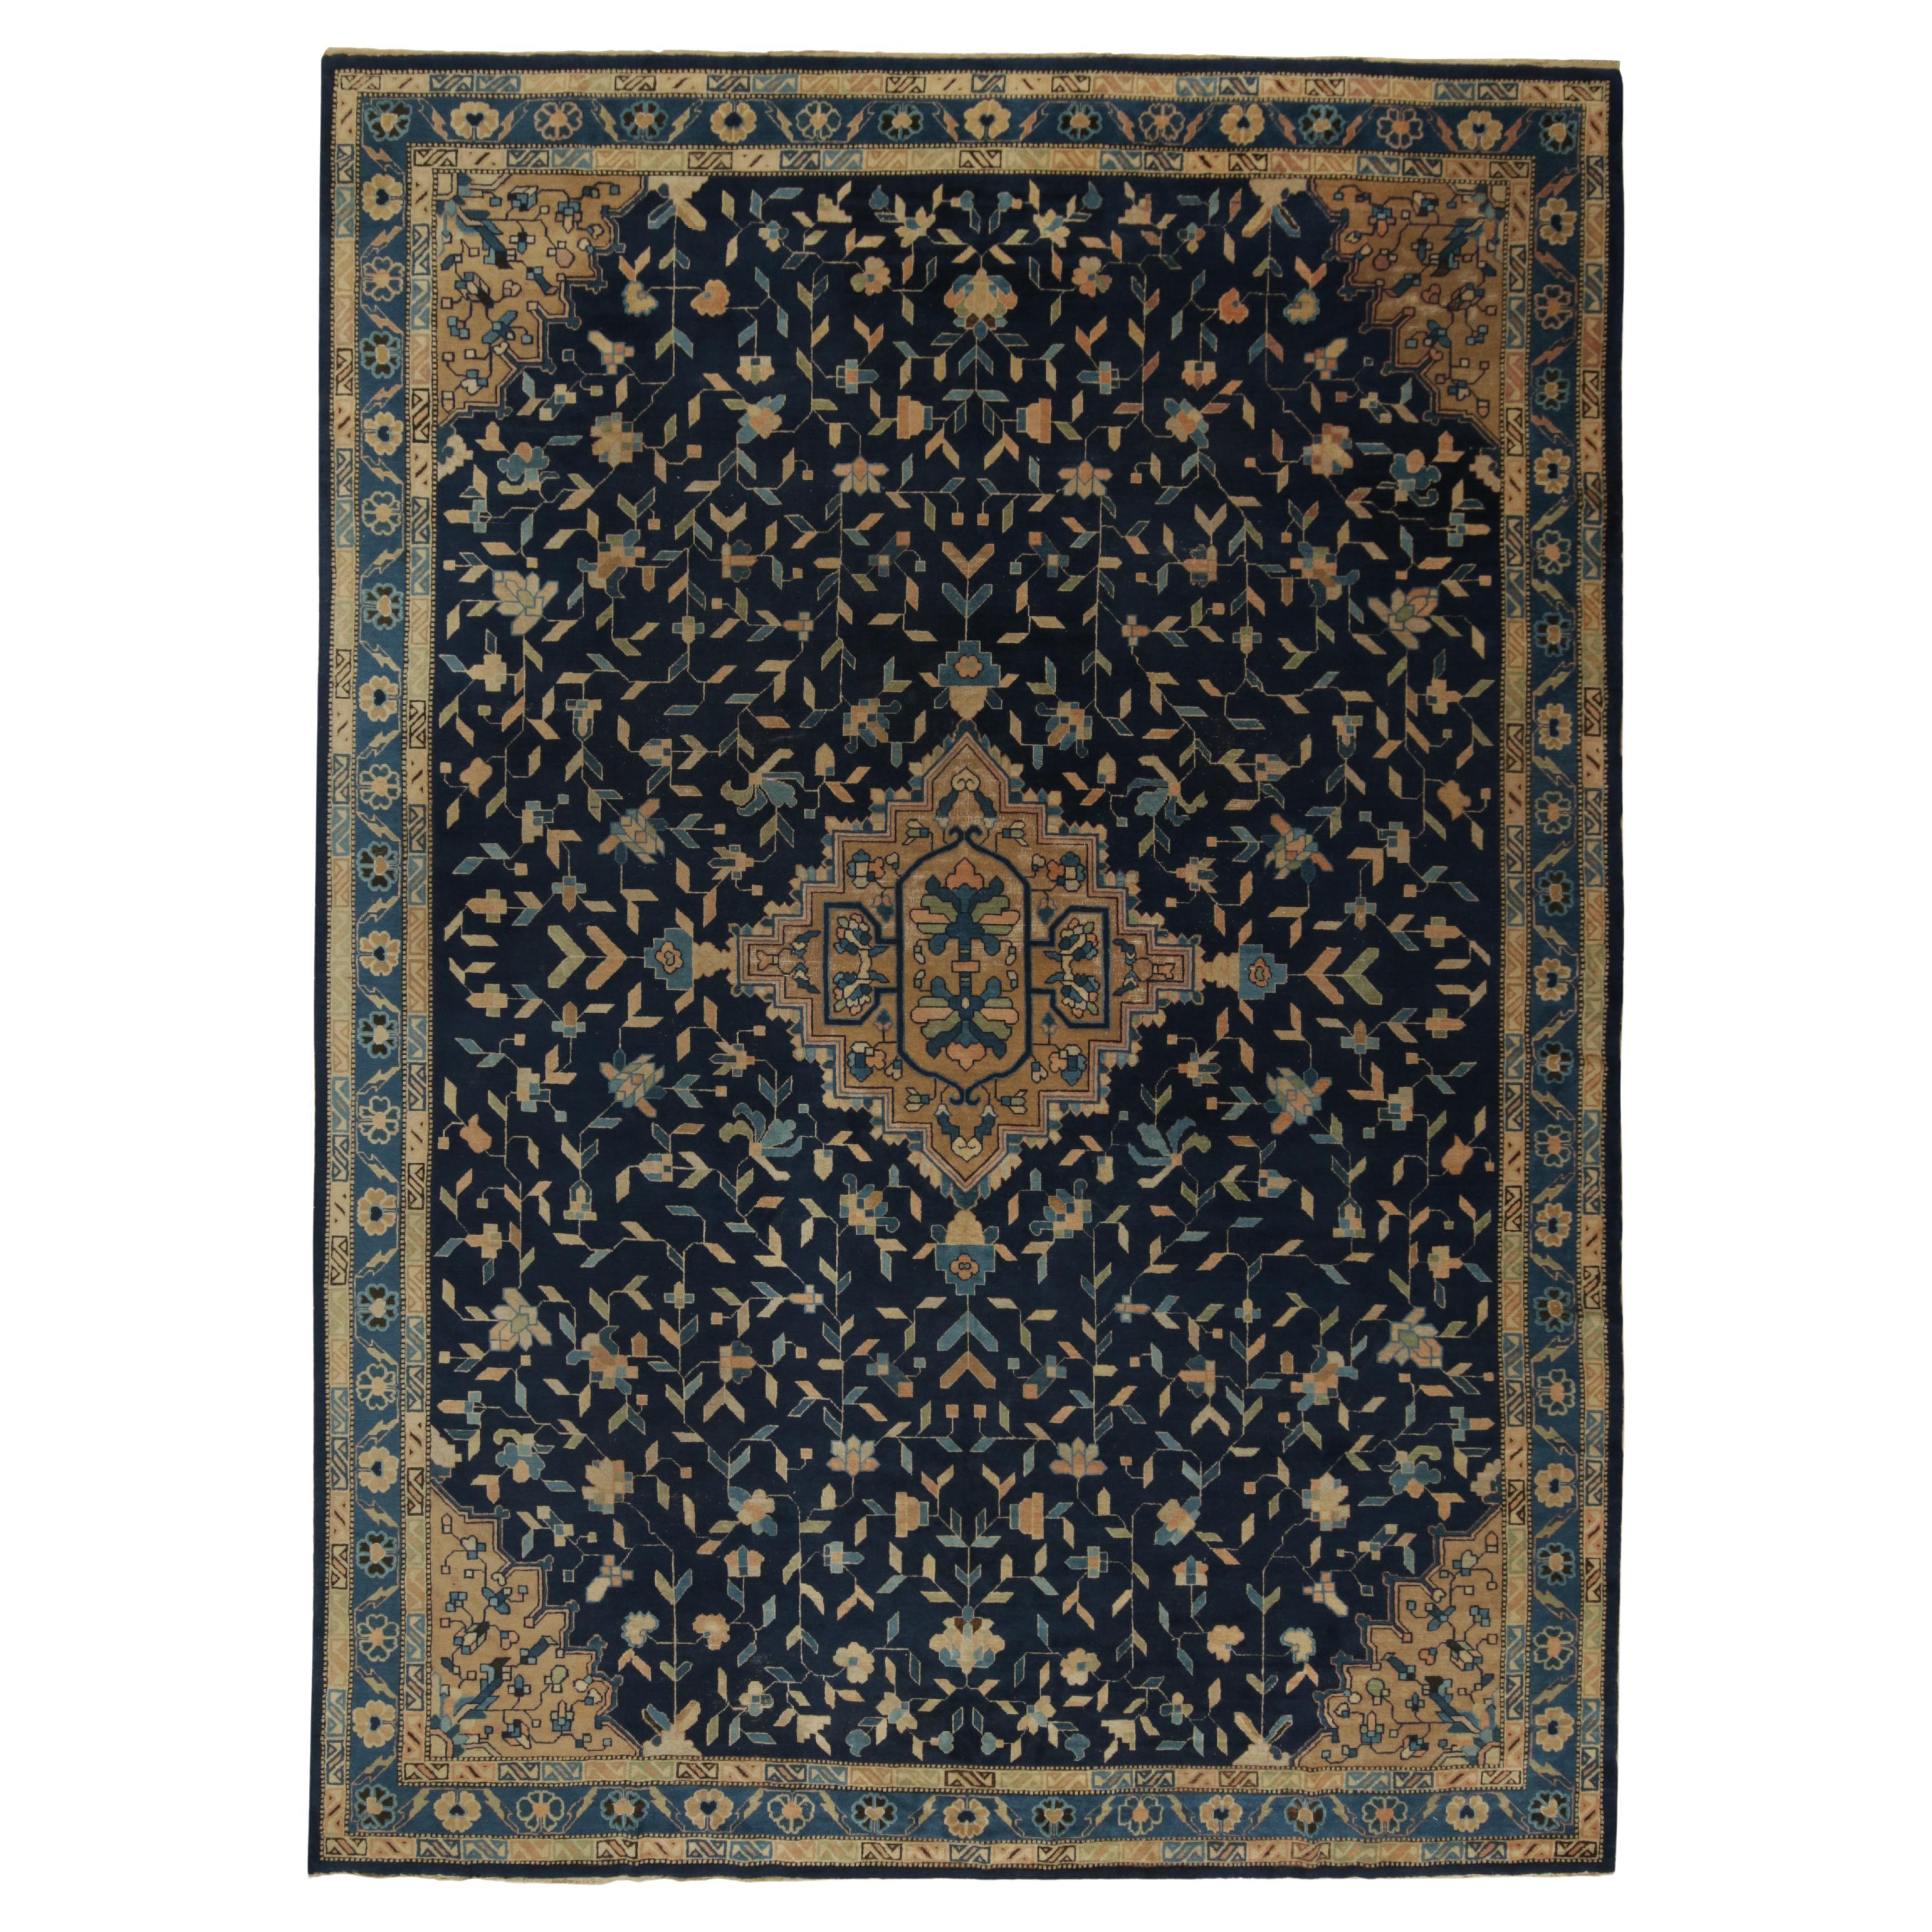 Antique Chinese Art Deco Rug in Blue with Gold Medallion, by Rug & Kilim